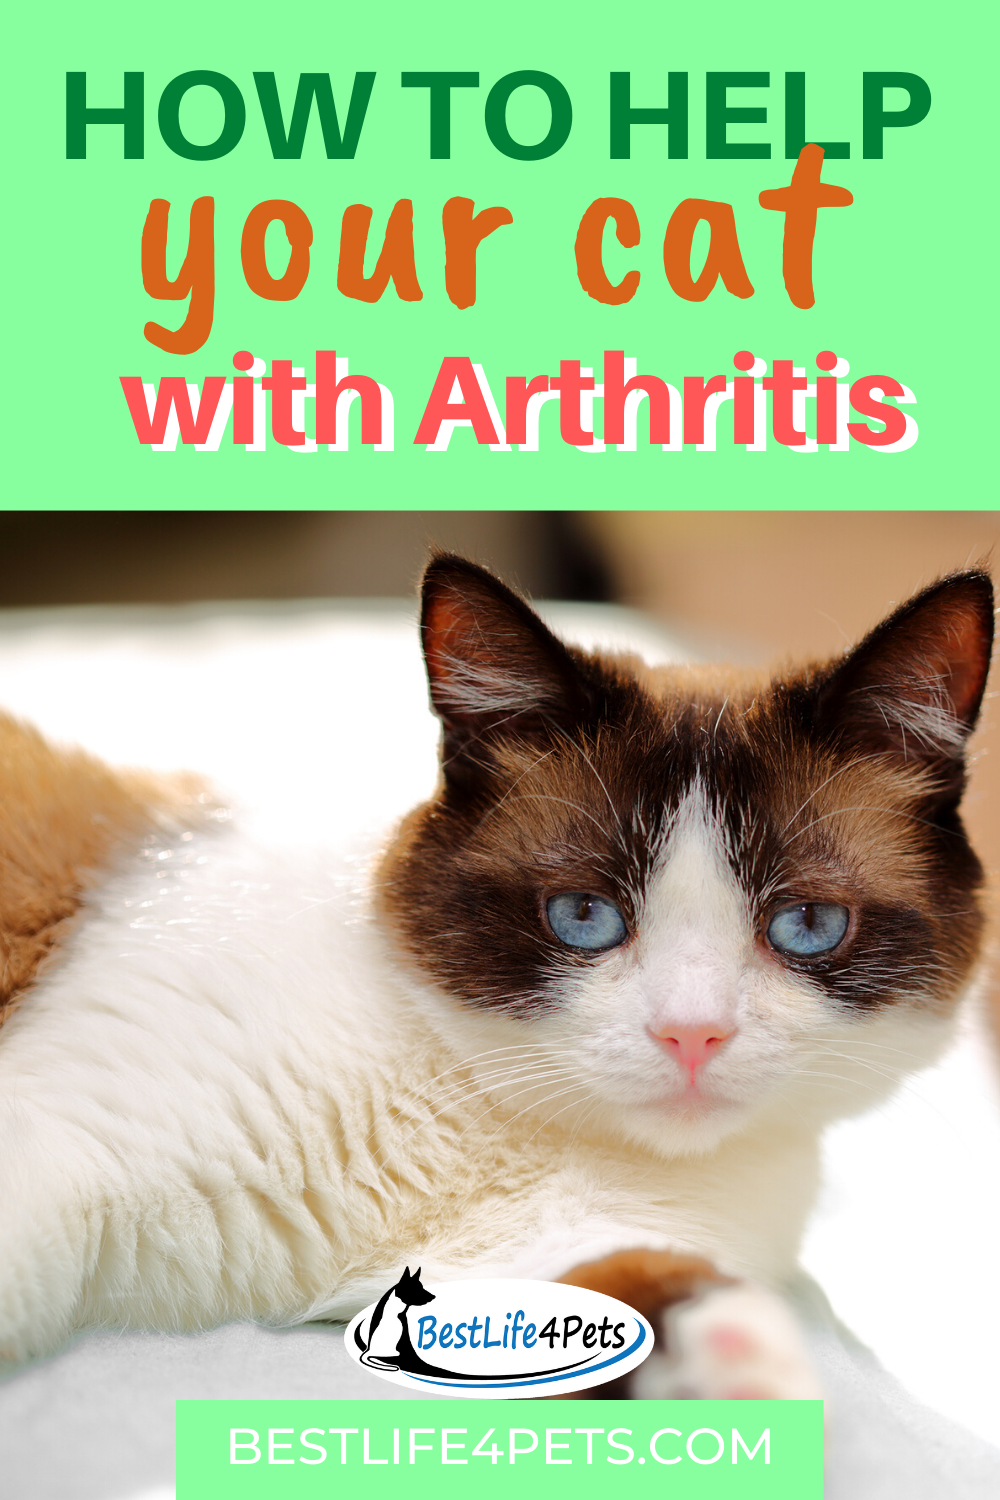 Cat Arthritis: How to Read the Signs in 2020